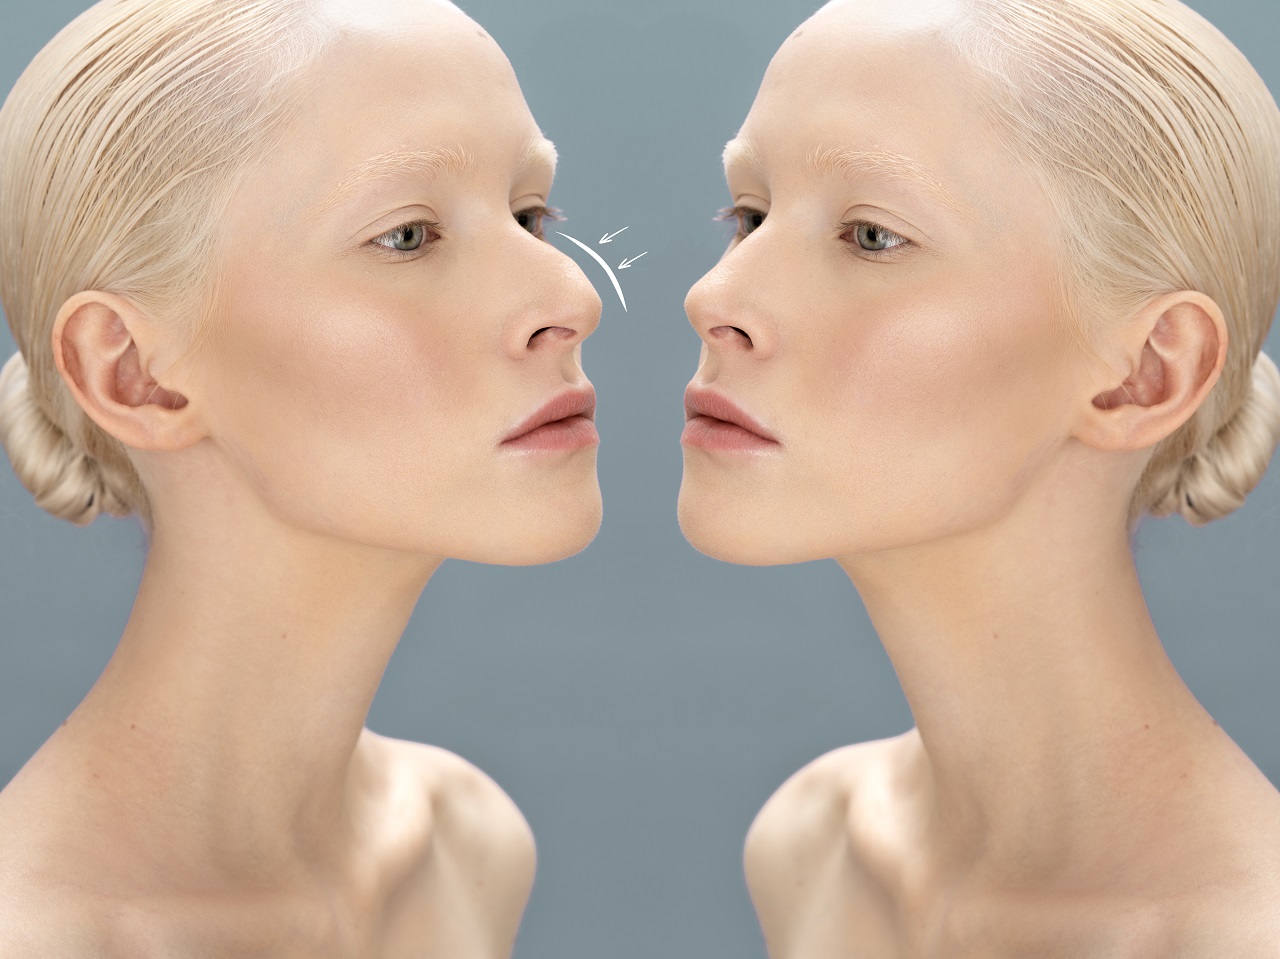 What is the Nose Job Age Limit? In Which Situations Is Nose Job Applied?